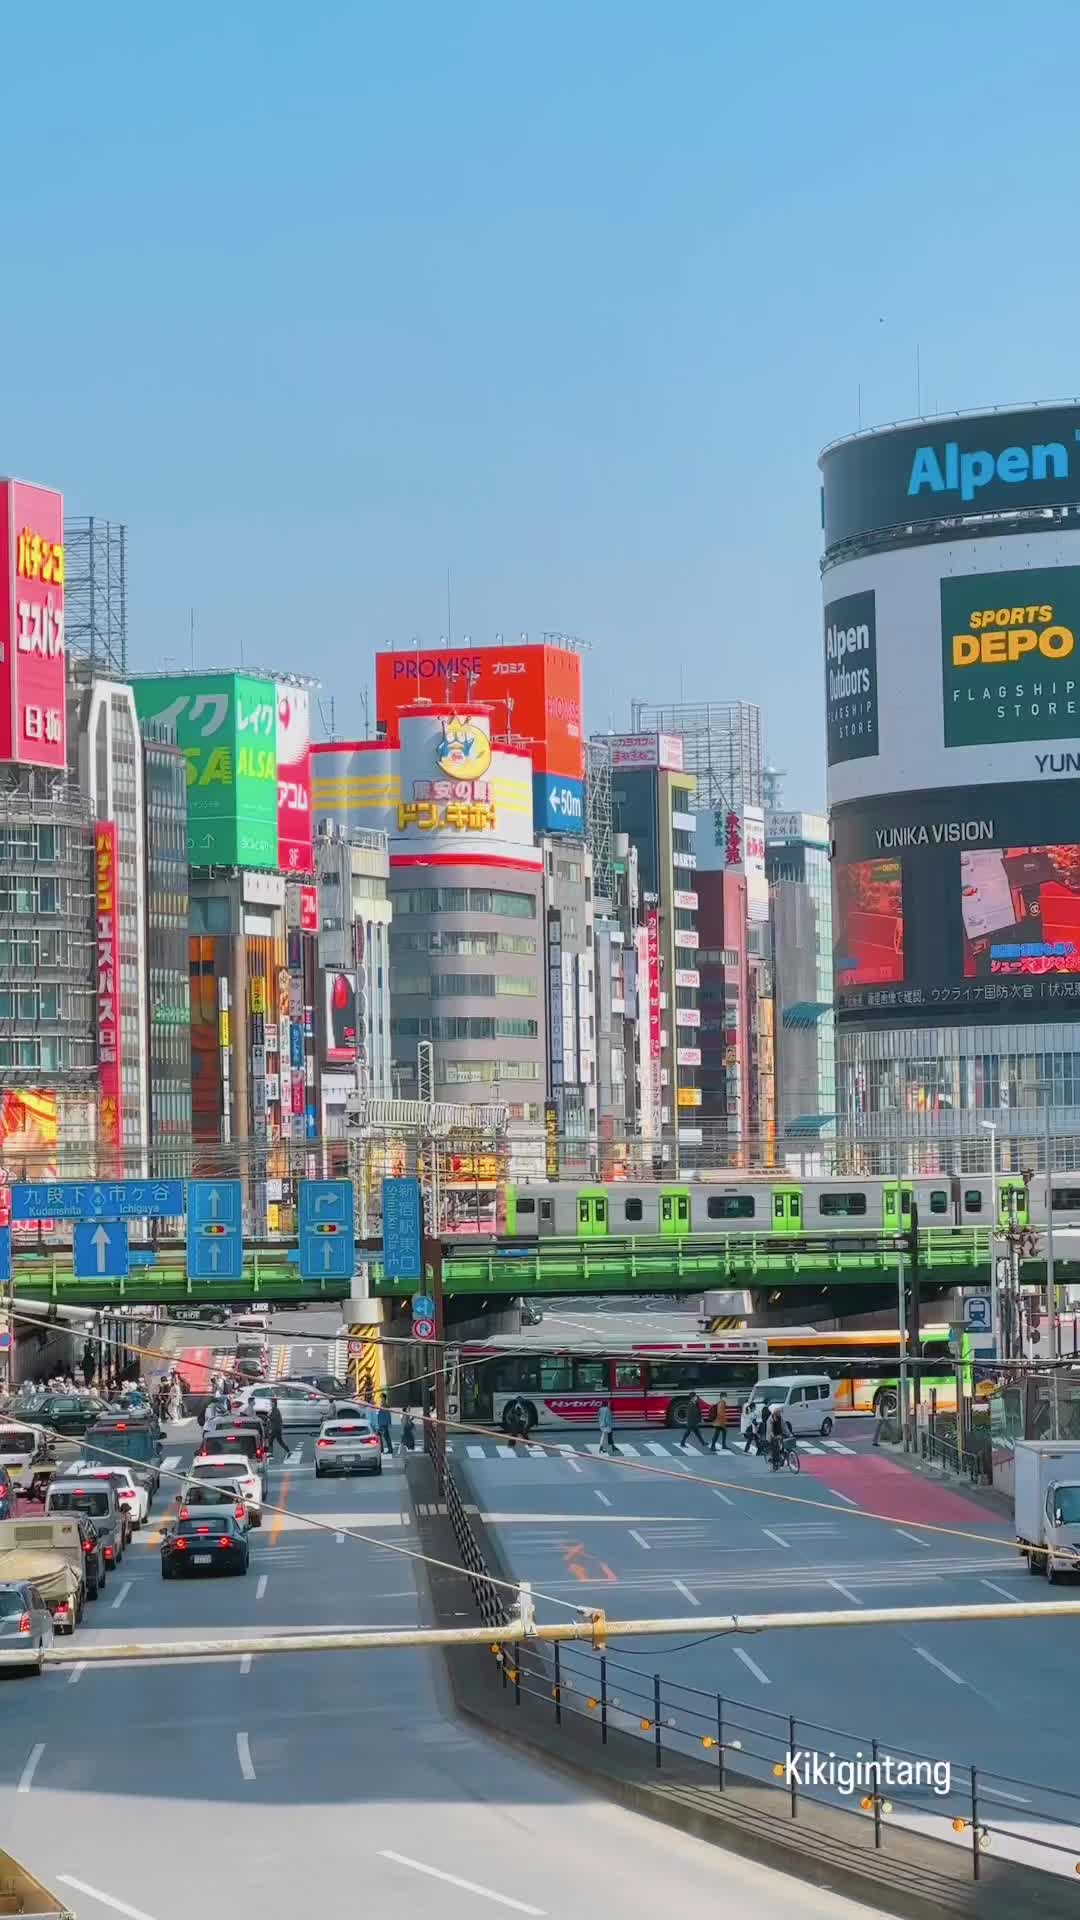 Ready for a Holiday to Japan This Year? Start Here!